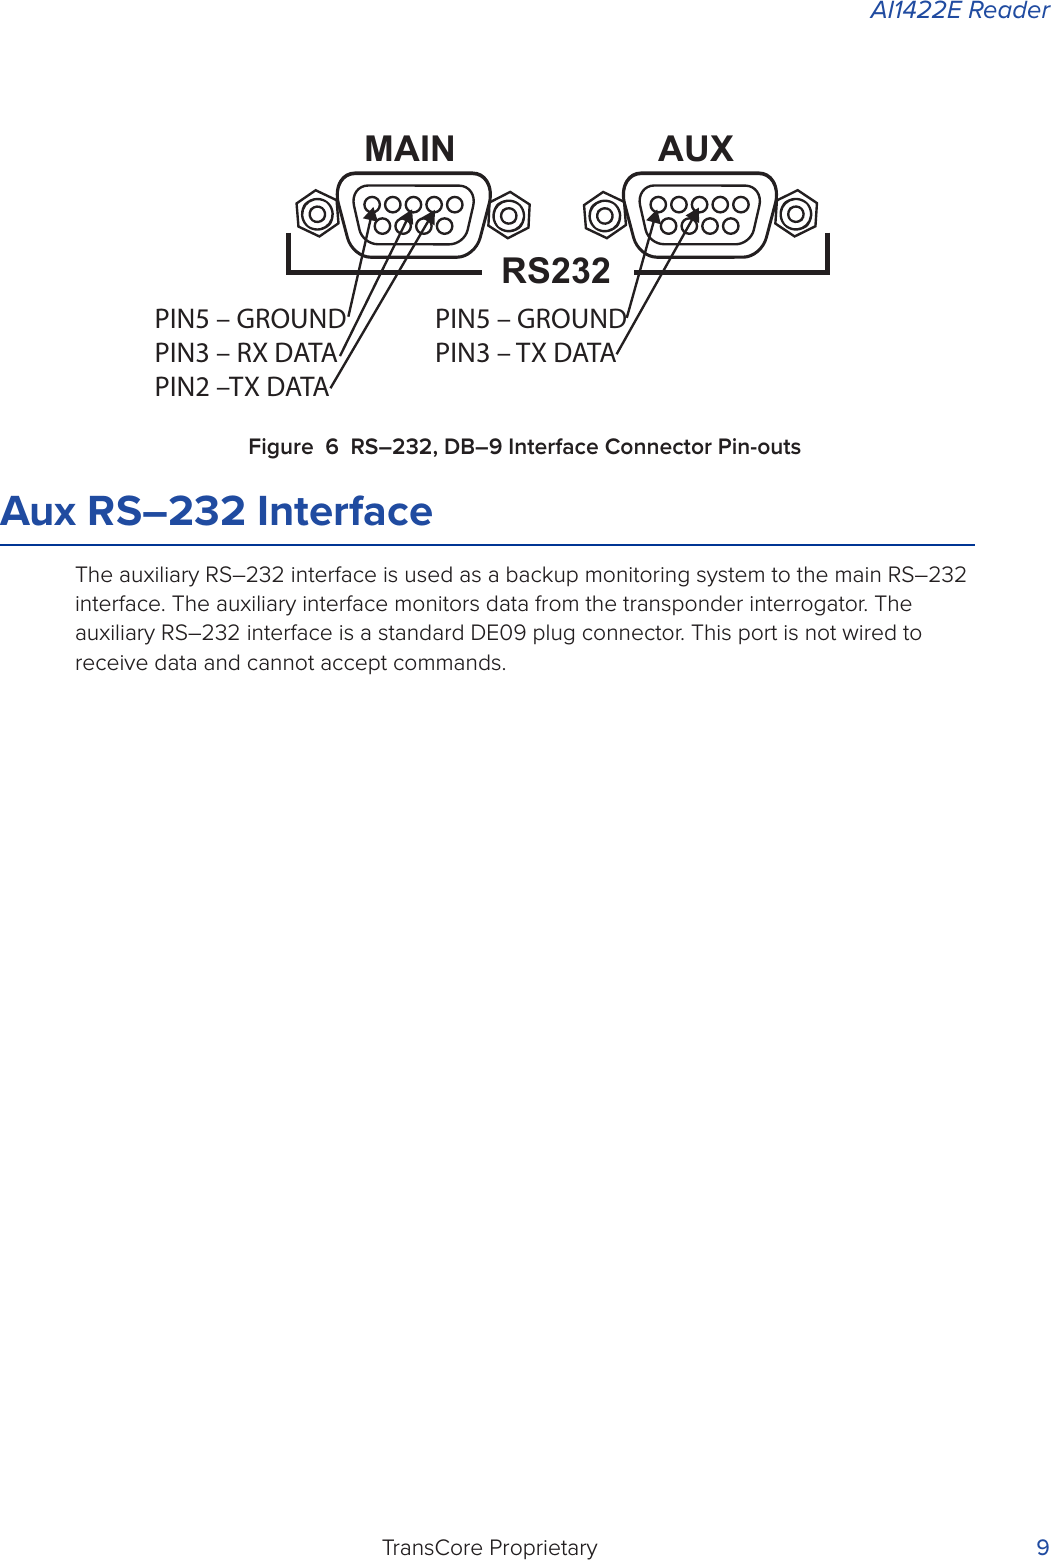 AI1422E ReaderTransCore Proprietary 9Figure 6 RS–232, DB–9 Interface Connector Pin-outsAux RS–232 InterfaceThe auxiliary RS–232 interface is used as a backup monitoring system to the main RS–232 interface. The auxiliary interface monitors data from the transponder interrogator. The auxiliary RS–232 interface is a standard DE09 plug connector. This port is not wired to receive data and cannot accept commands. RS232AUXMAINPIN5 – GROUNDPIN3 – RX DATAPIN2 –TX DATAPIN5 – GROUNDPIN3 – TX DATA